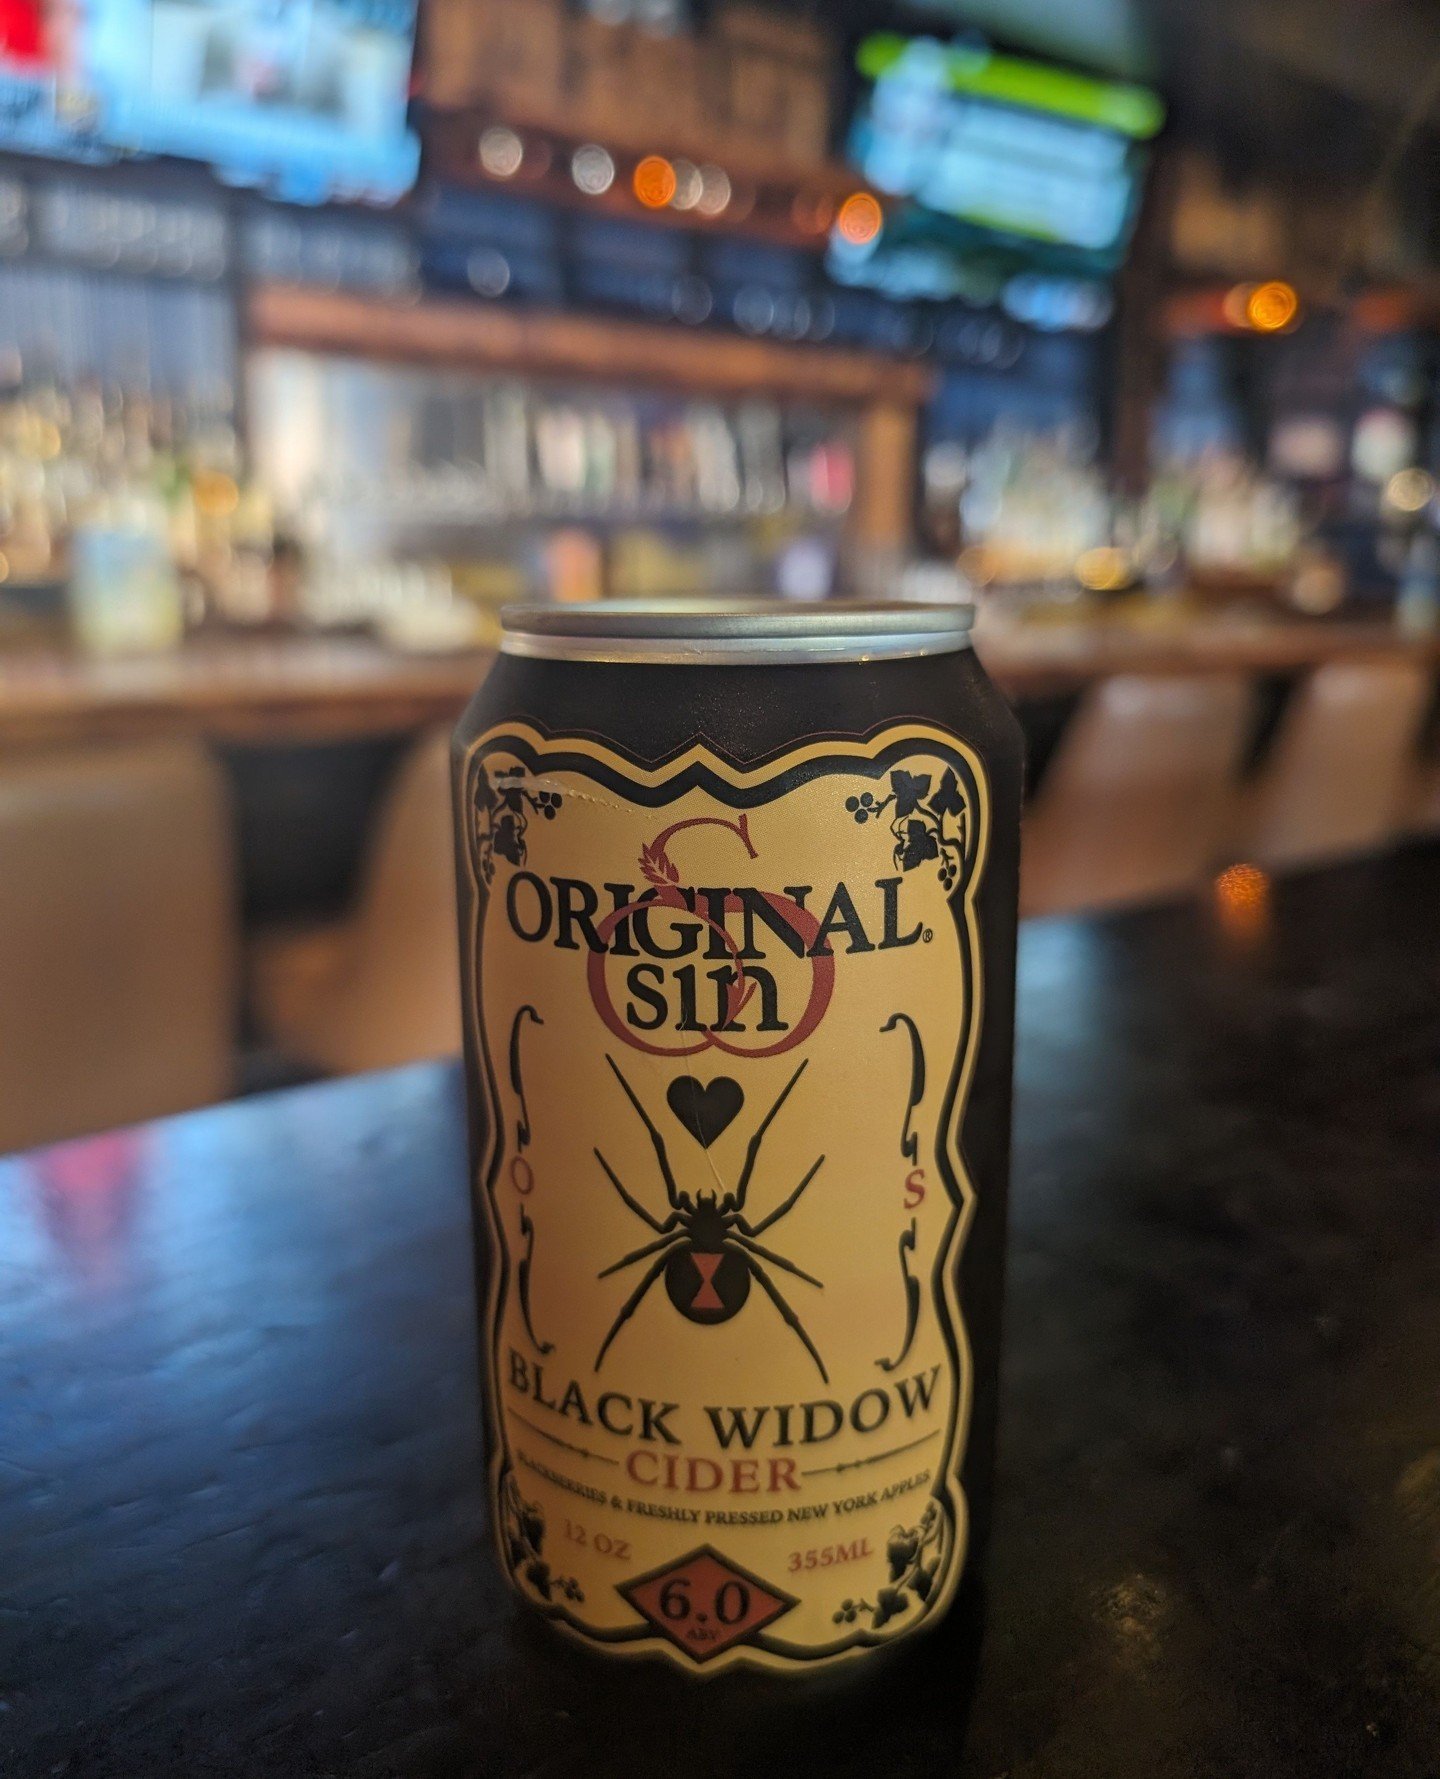 Check out this delicious 6% cider we're serving up! Original Sin Black Widow Cider is fruit forward, yet tart, made with blackberries and freshly pressed New York apples! Come give it a try tonight at The Moonlighter!⁠
The Cubs game starts at 5:40 an